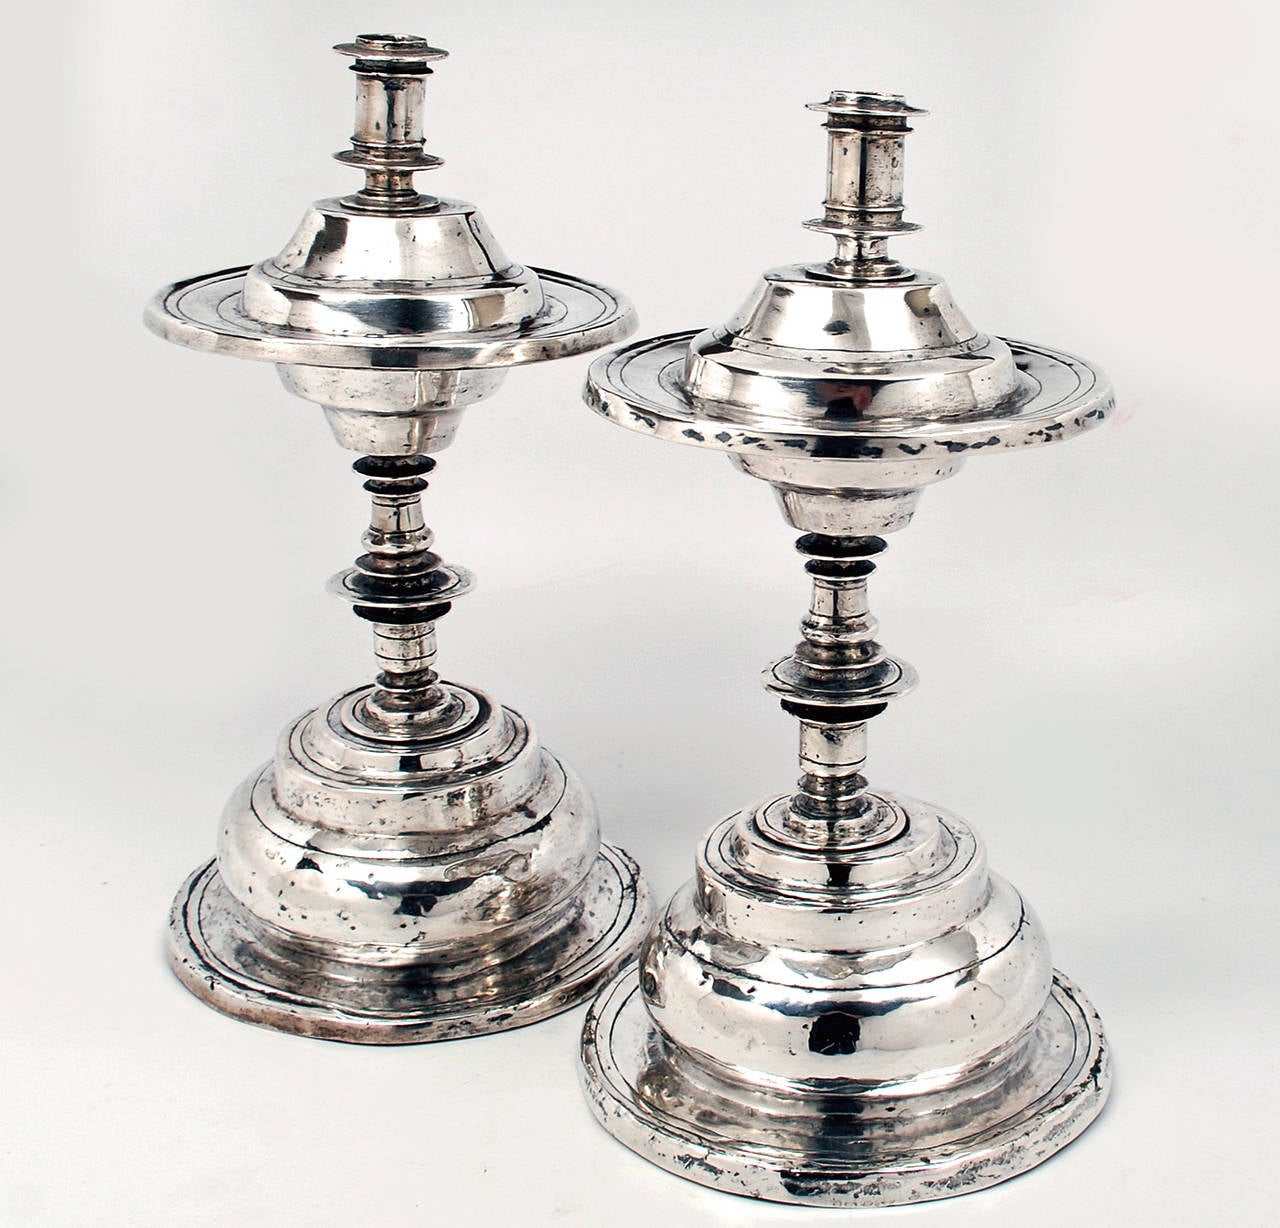 A pair of magnificent 17th / early 18th century Spanish Colonial devotional silver candlesticks with large footed ring base, baluster form stem, multiple node rings and a large node ring drip pan surmounted by a socket. The underside with original